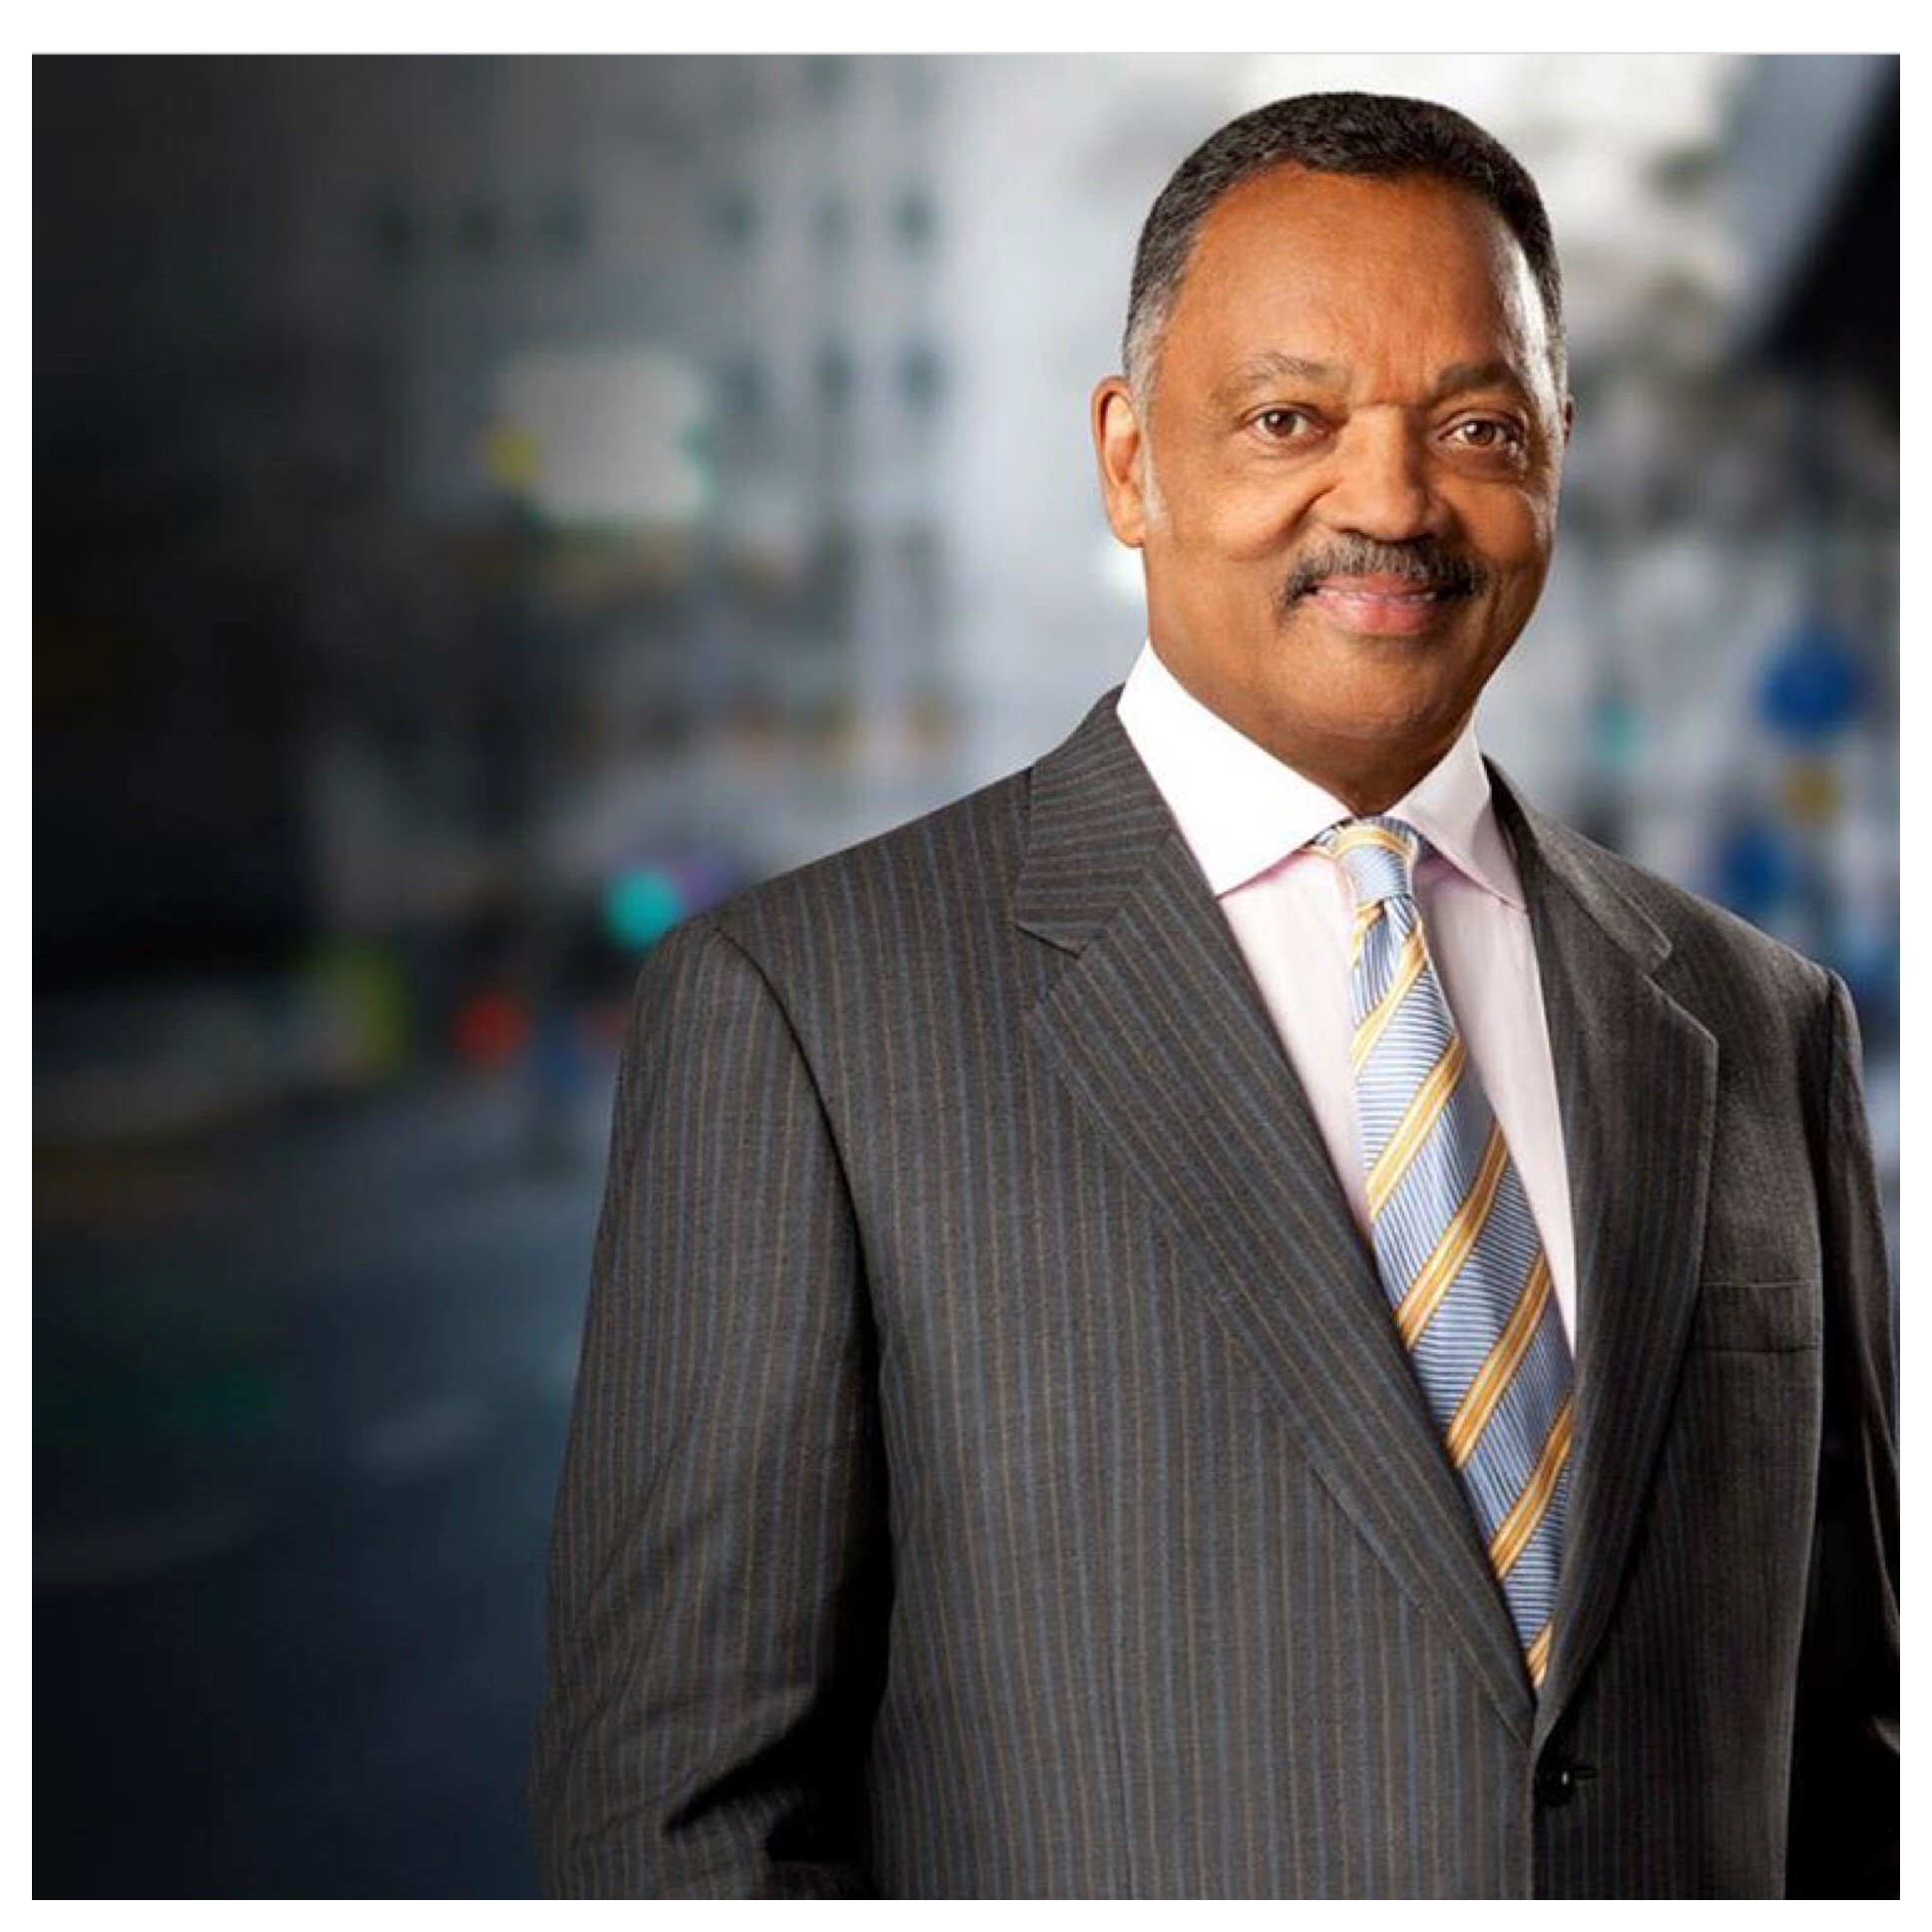 Prayers Going Up. Dr. Jesse Jackson Says He Has Been Diagnosed With Parkinson’s Disease.